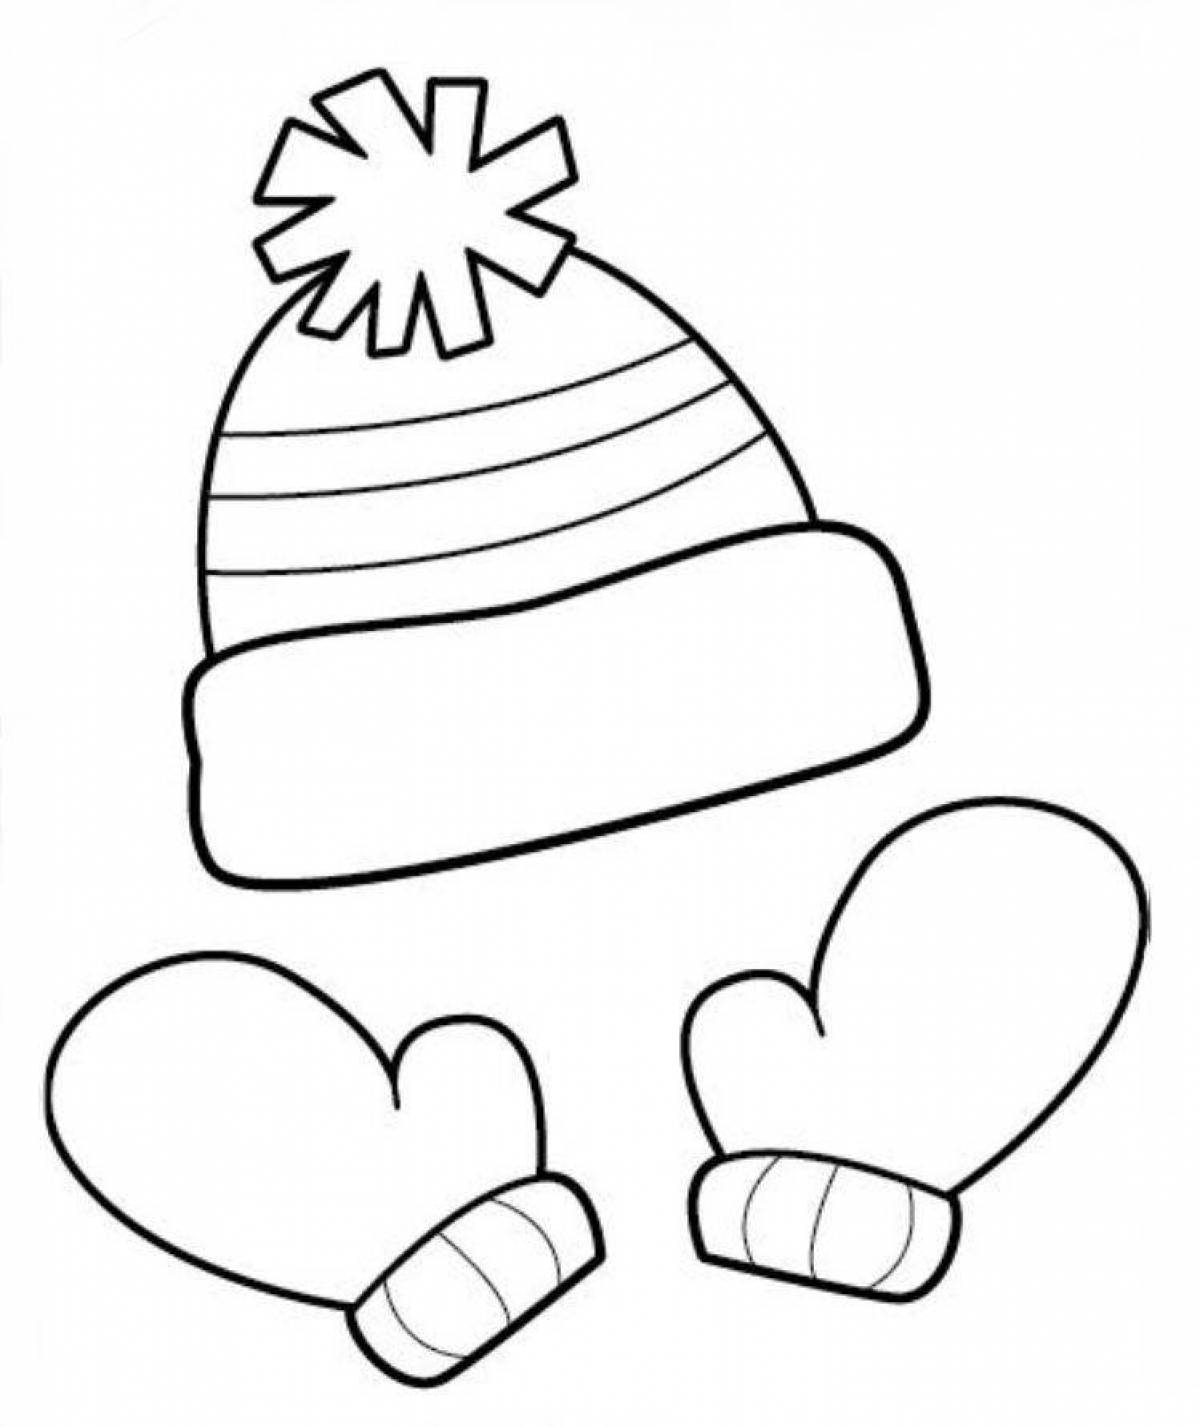 Fancy hat and scarf coloring book